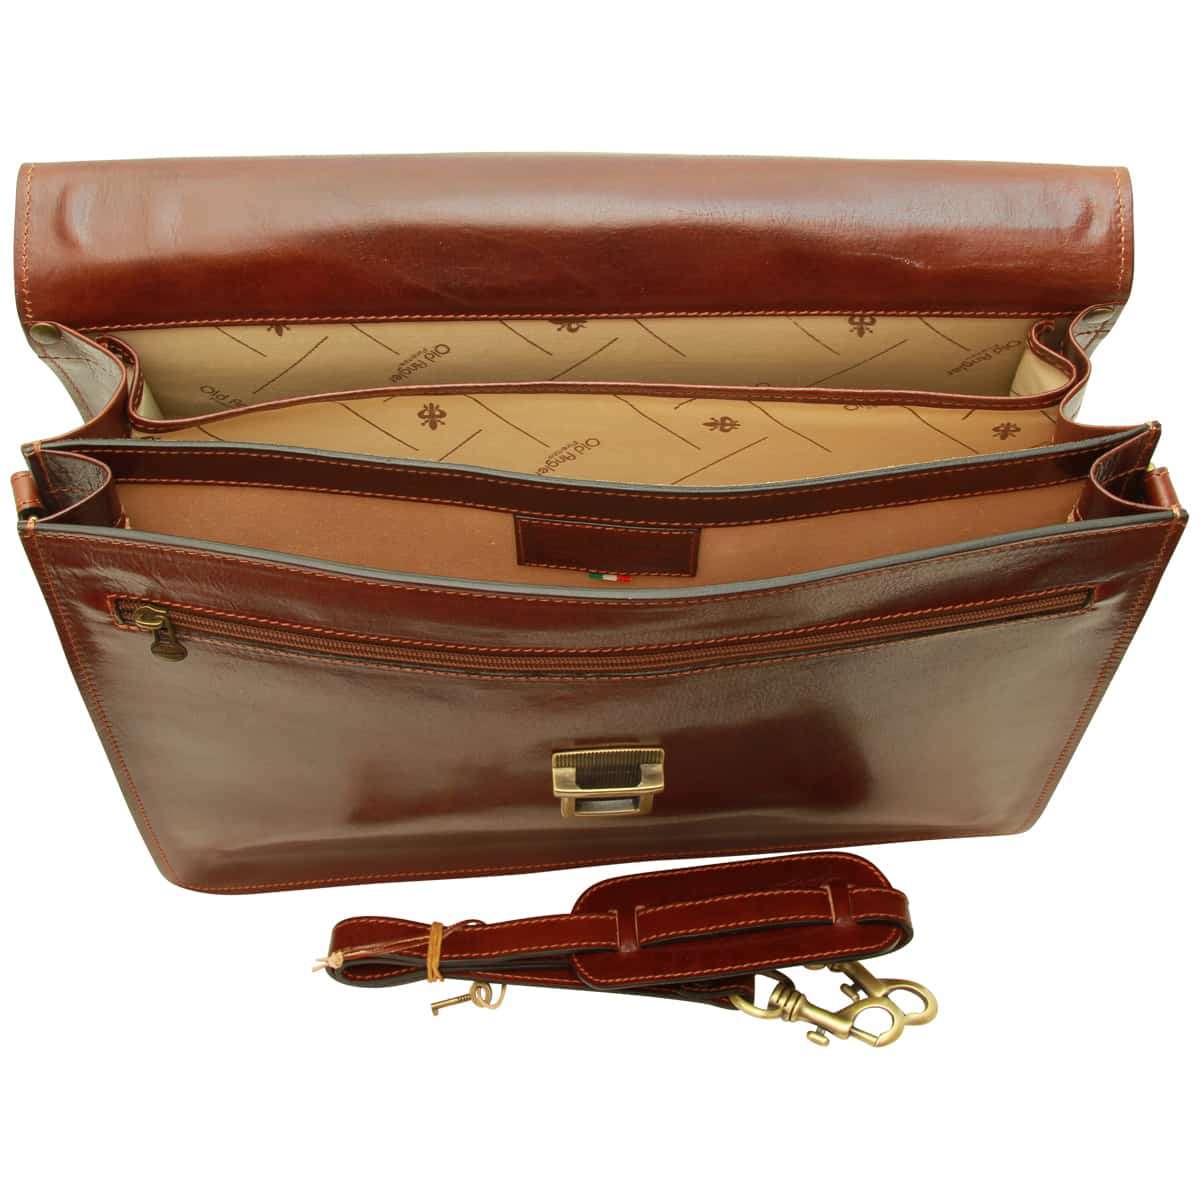 Leather Laptop Briefcase - Brown | 052805MA | EURO | Old Angler Firenze